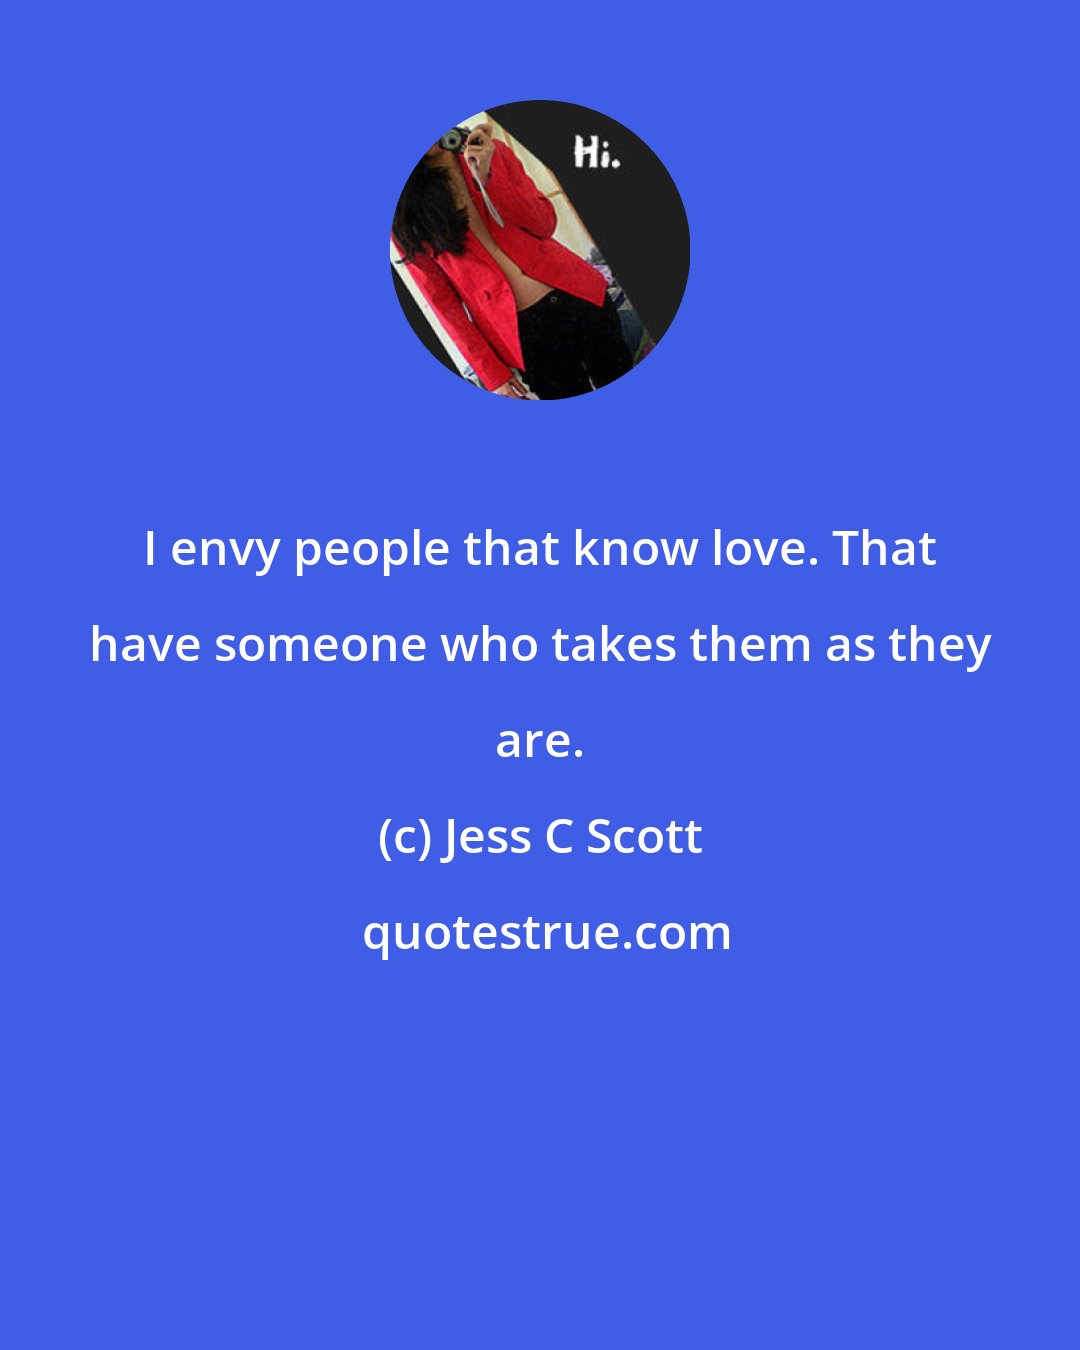 Jess C Scott: I envy people that know love. That have someone who takes them as they are.